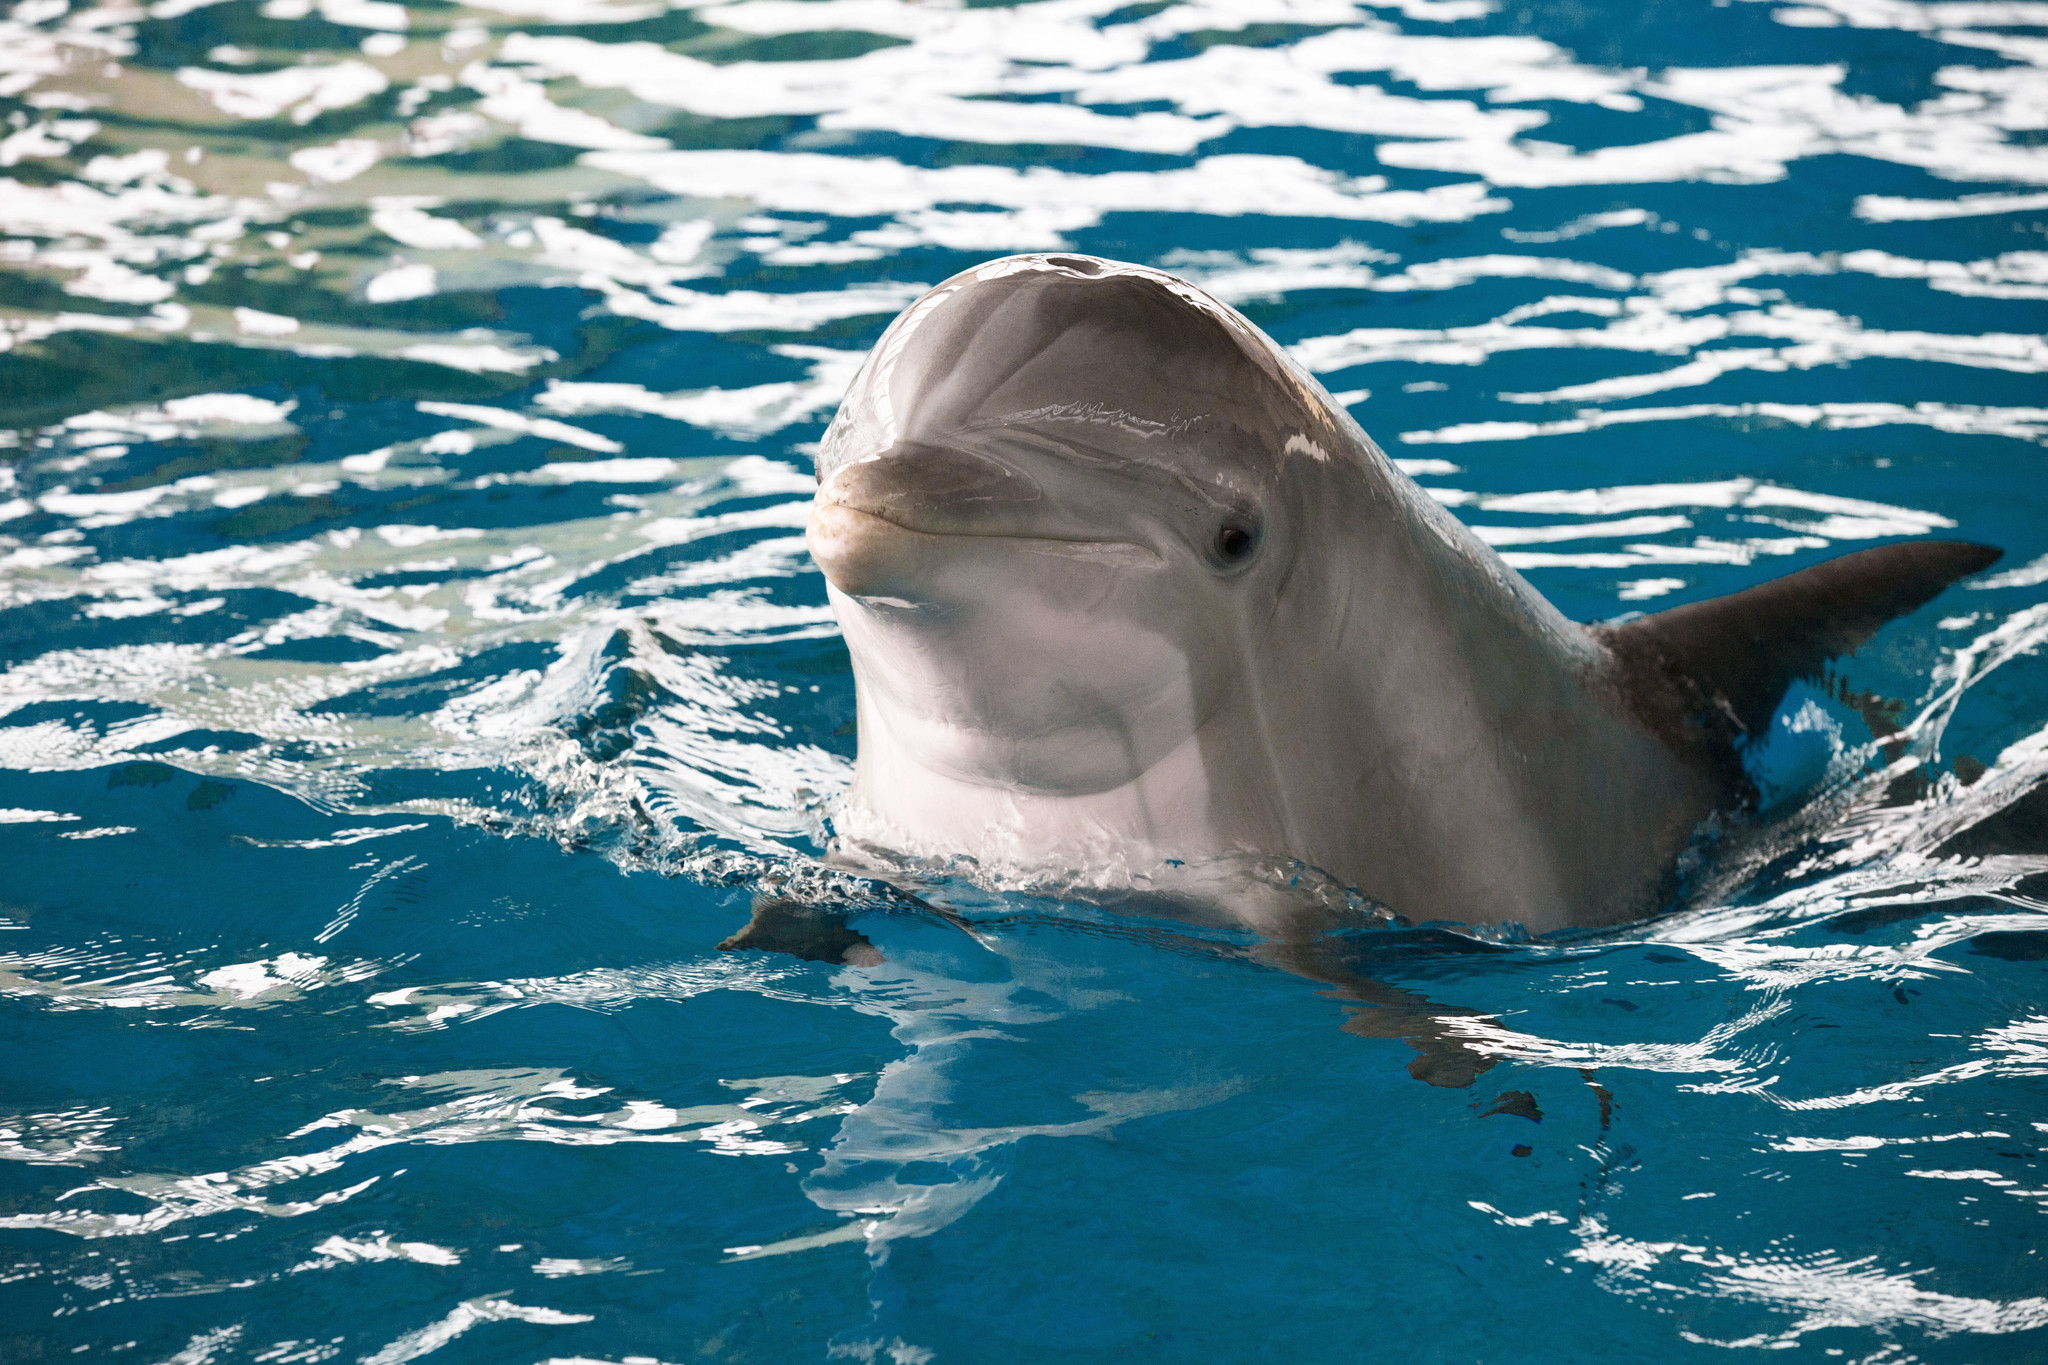 National Aquarium: The time is right to move our dolphins to a seaside sanctuary ...2048 x 1365